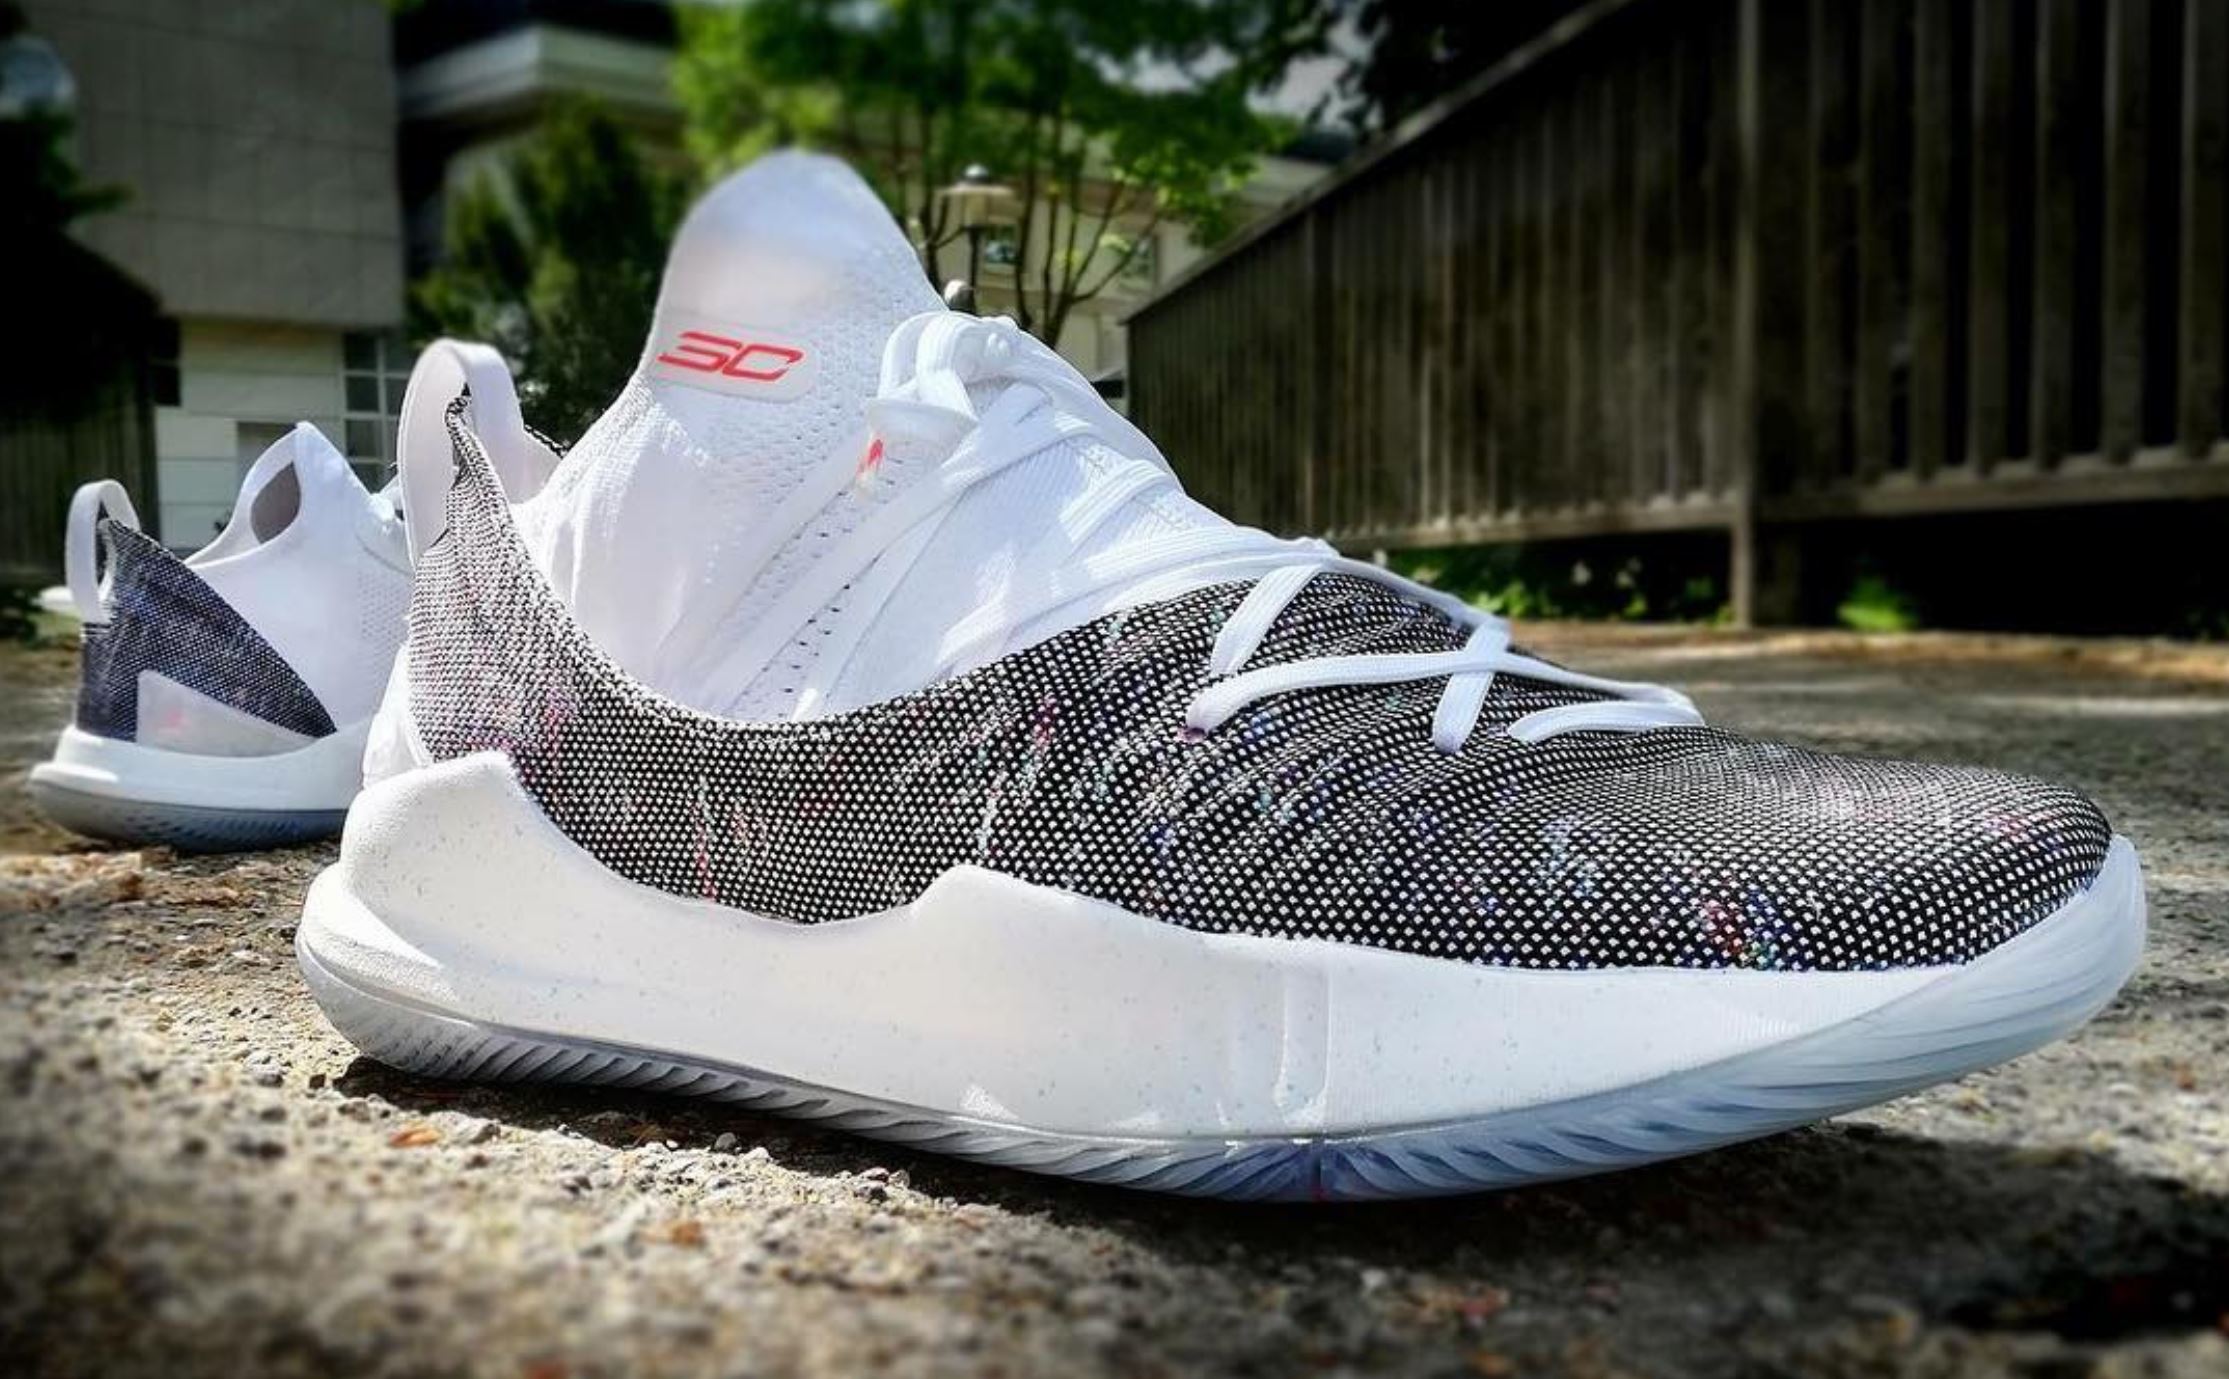 The Under Armour Curry 5 is Getting its 